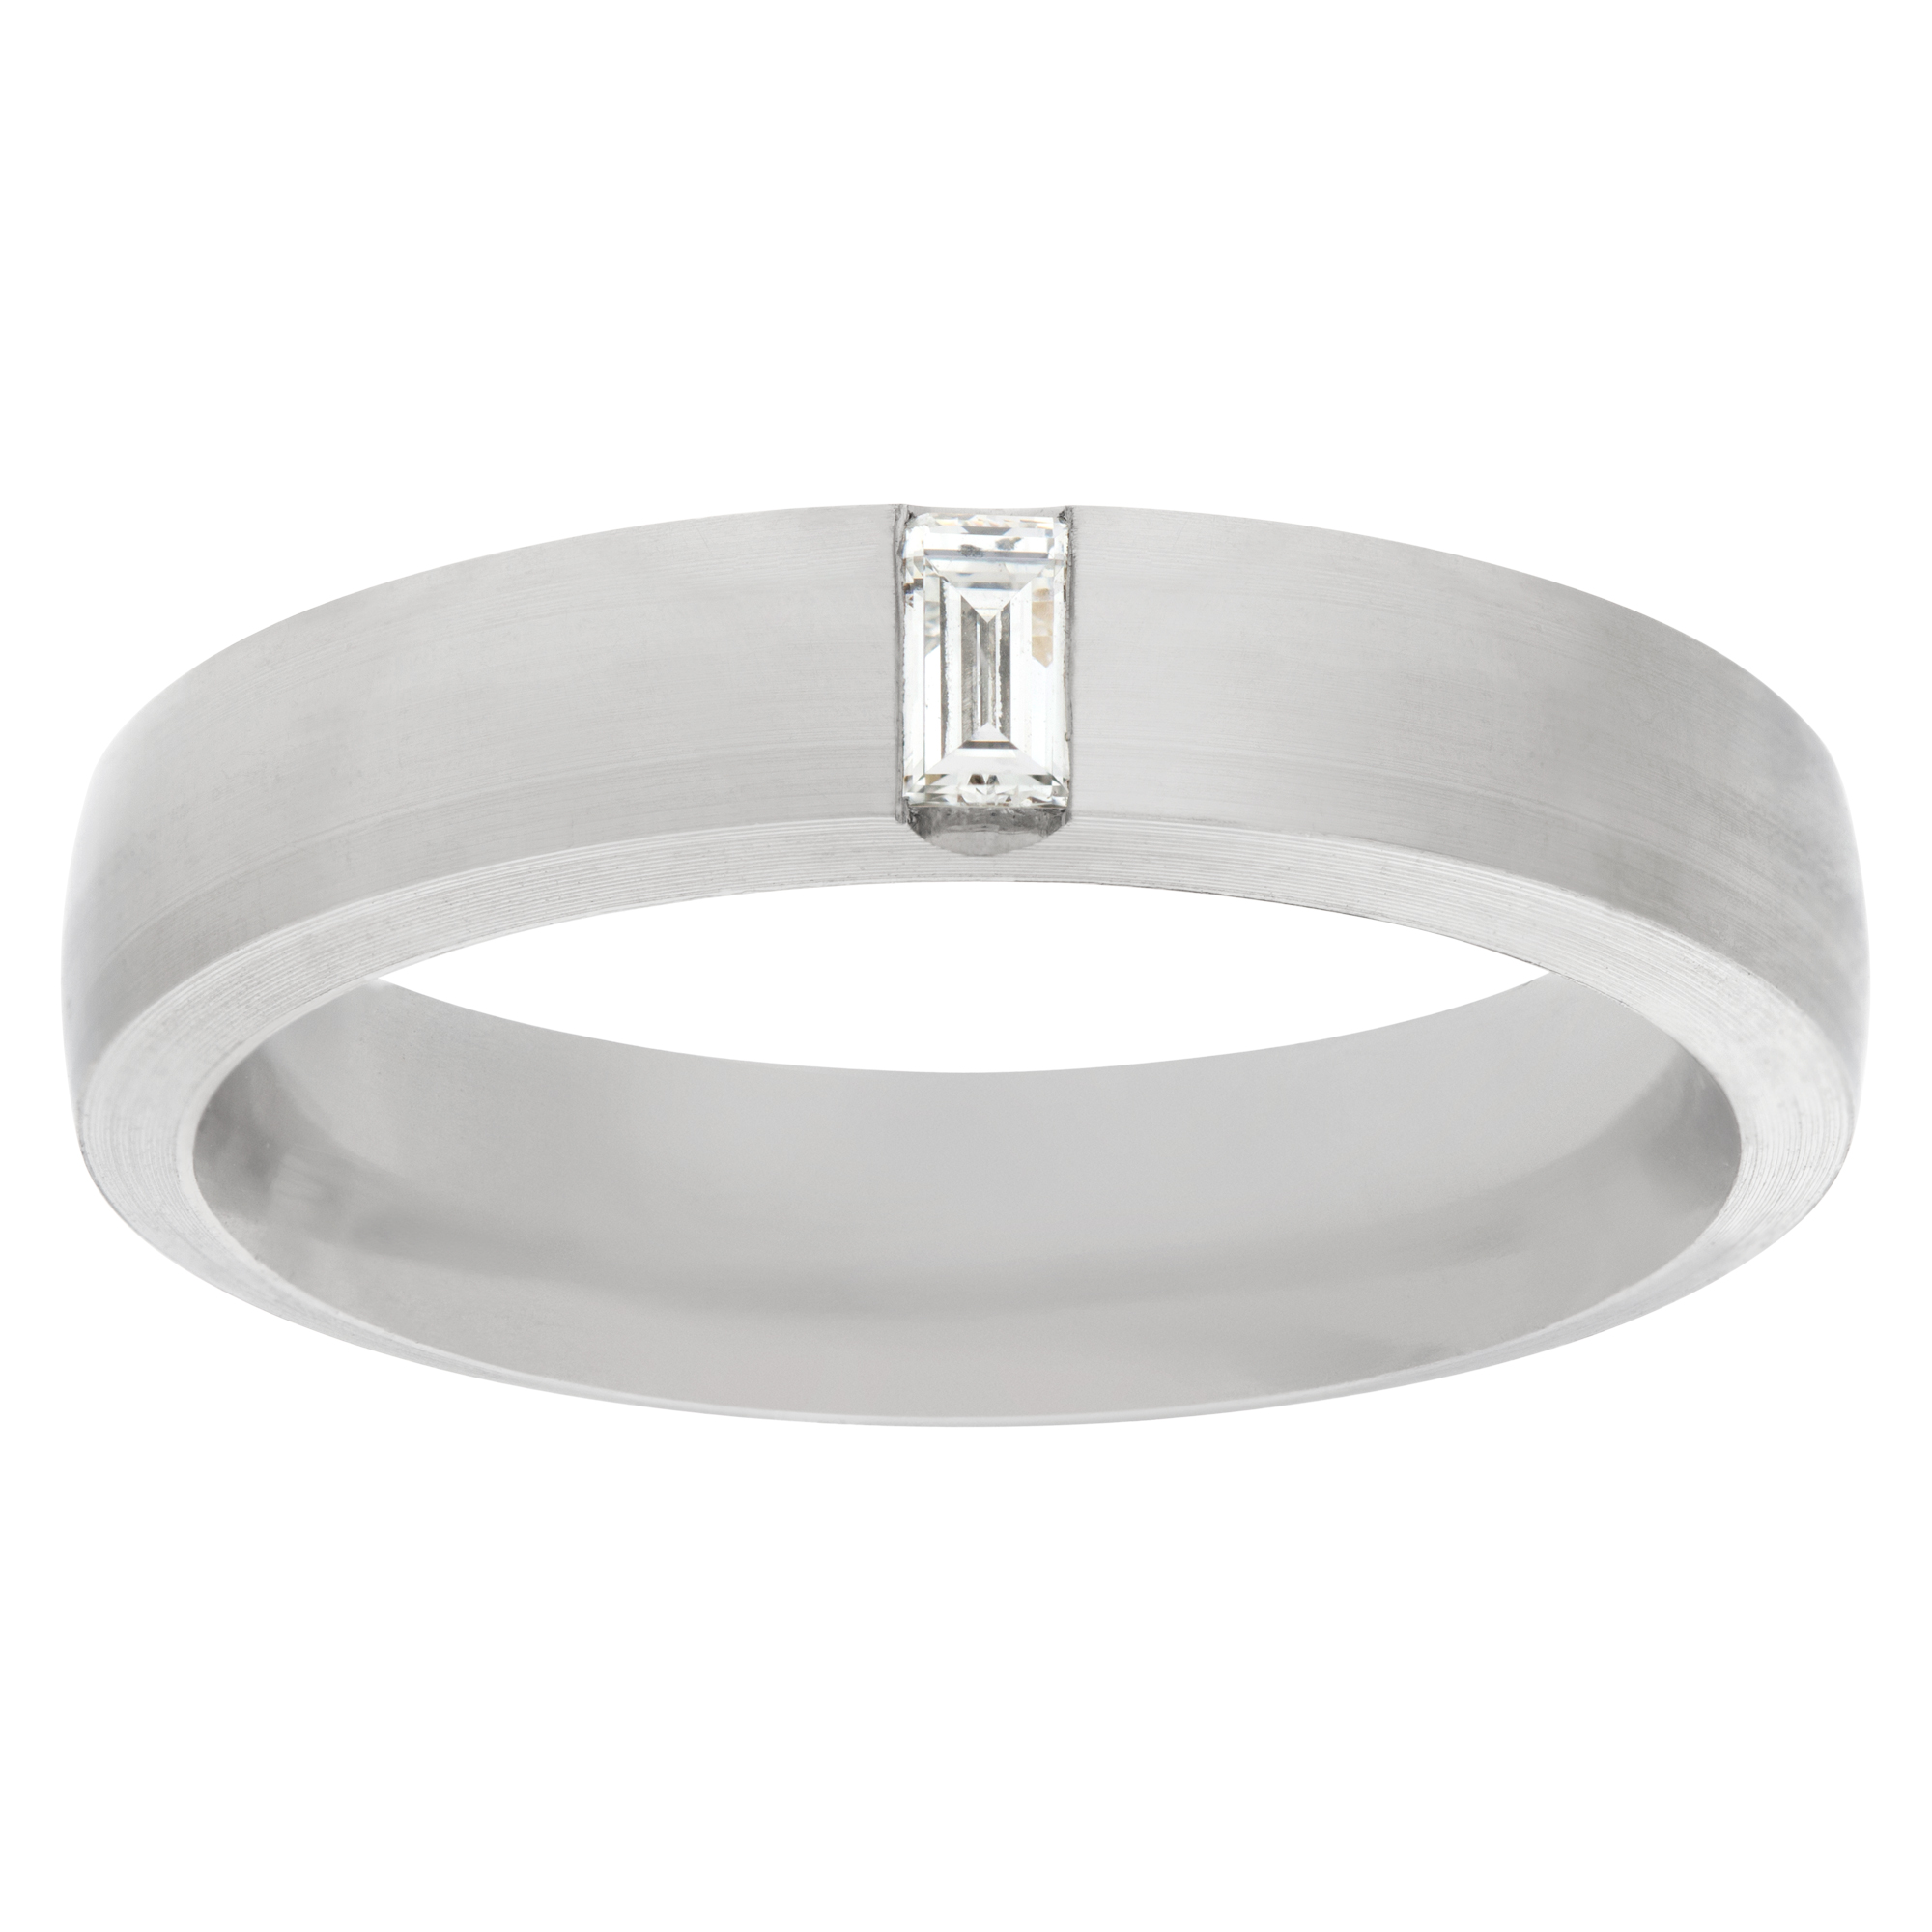 Tiffany & Co.Satin platinum ring with a baguette diamond